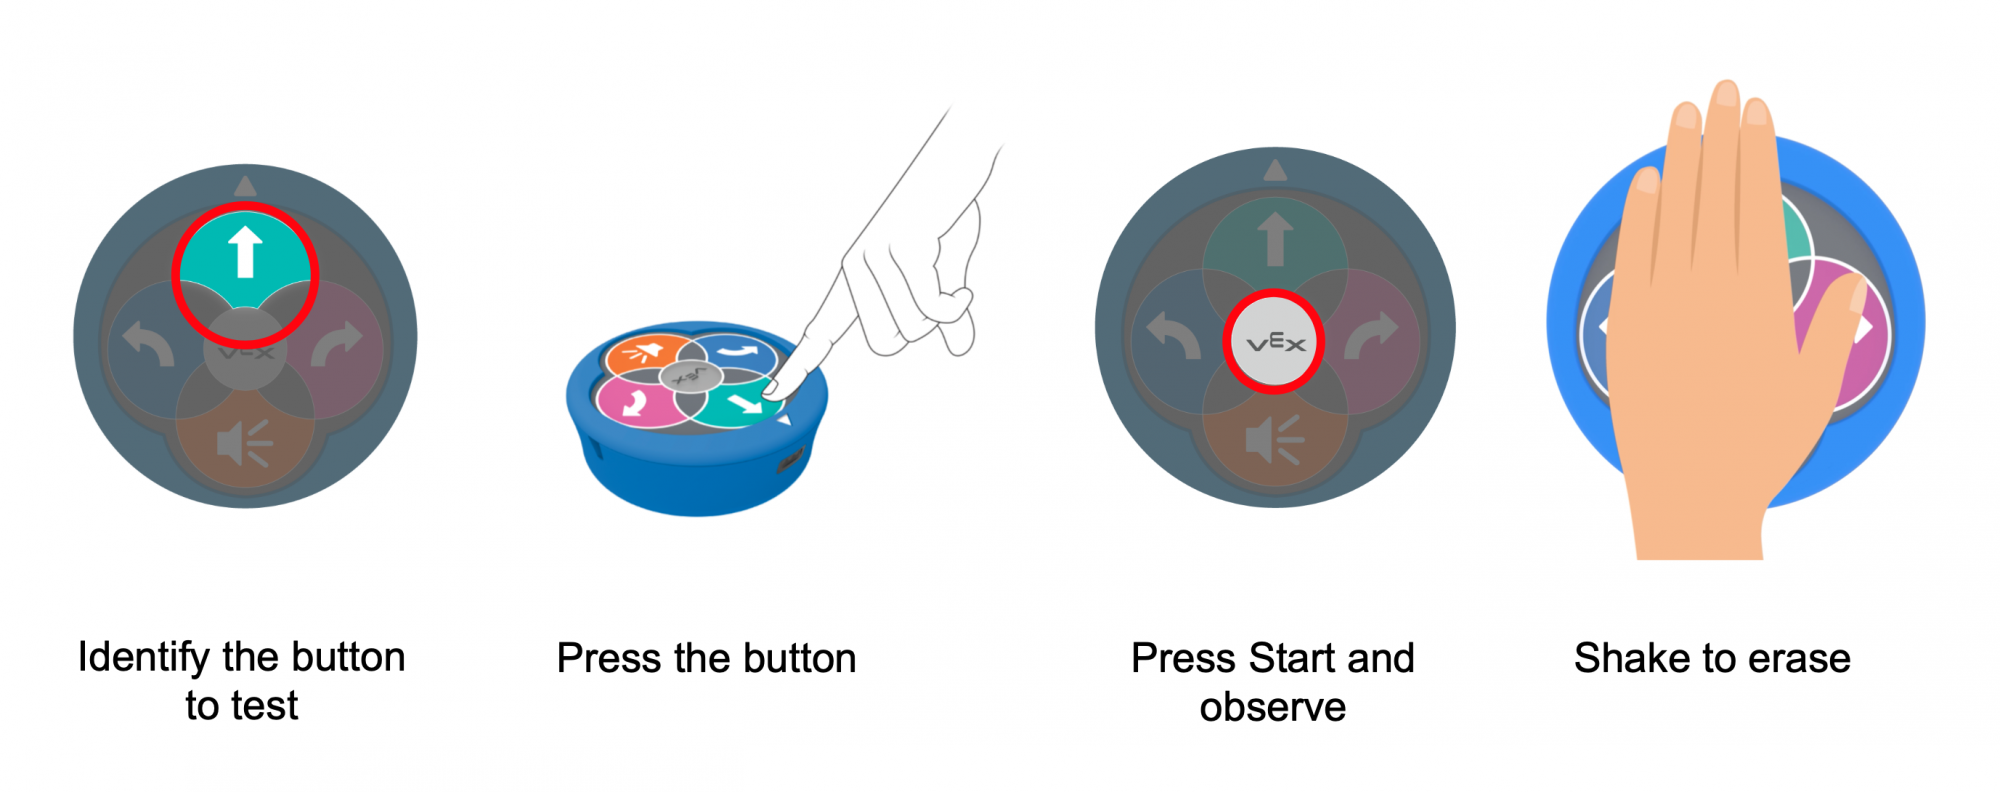 image of steps to test the touch buttons- identify the button, press the button, press start and observe, shake to erase